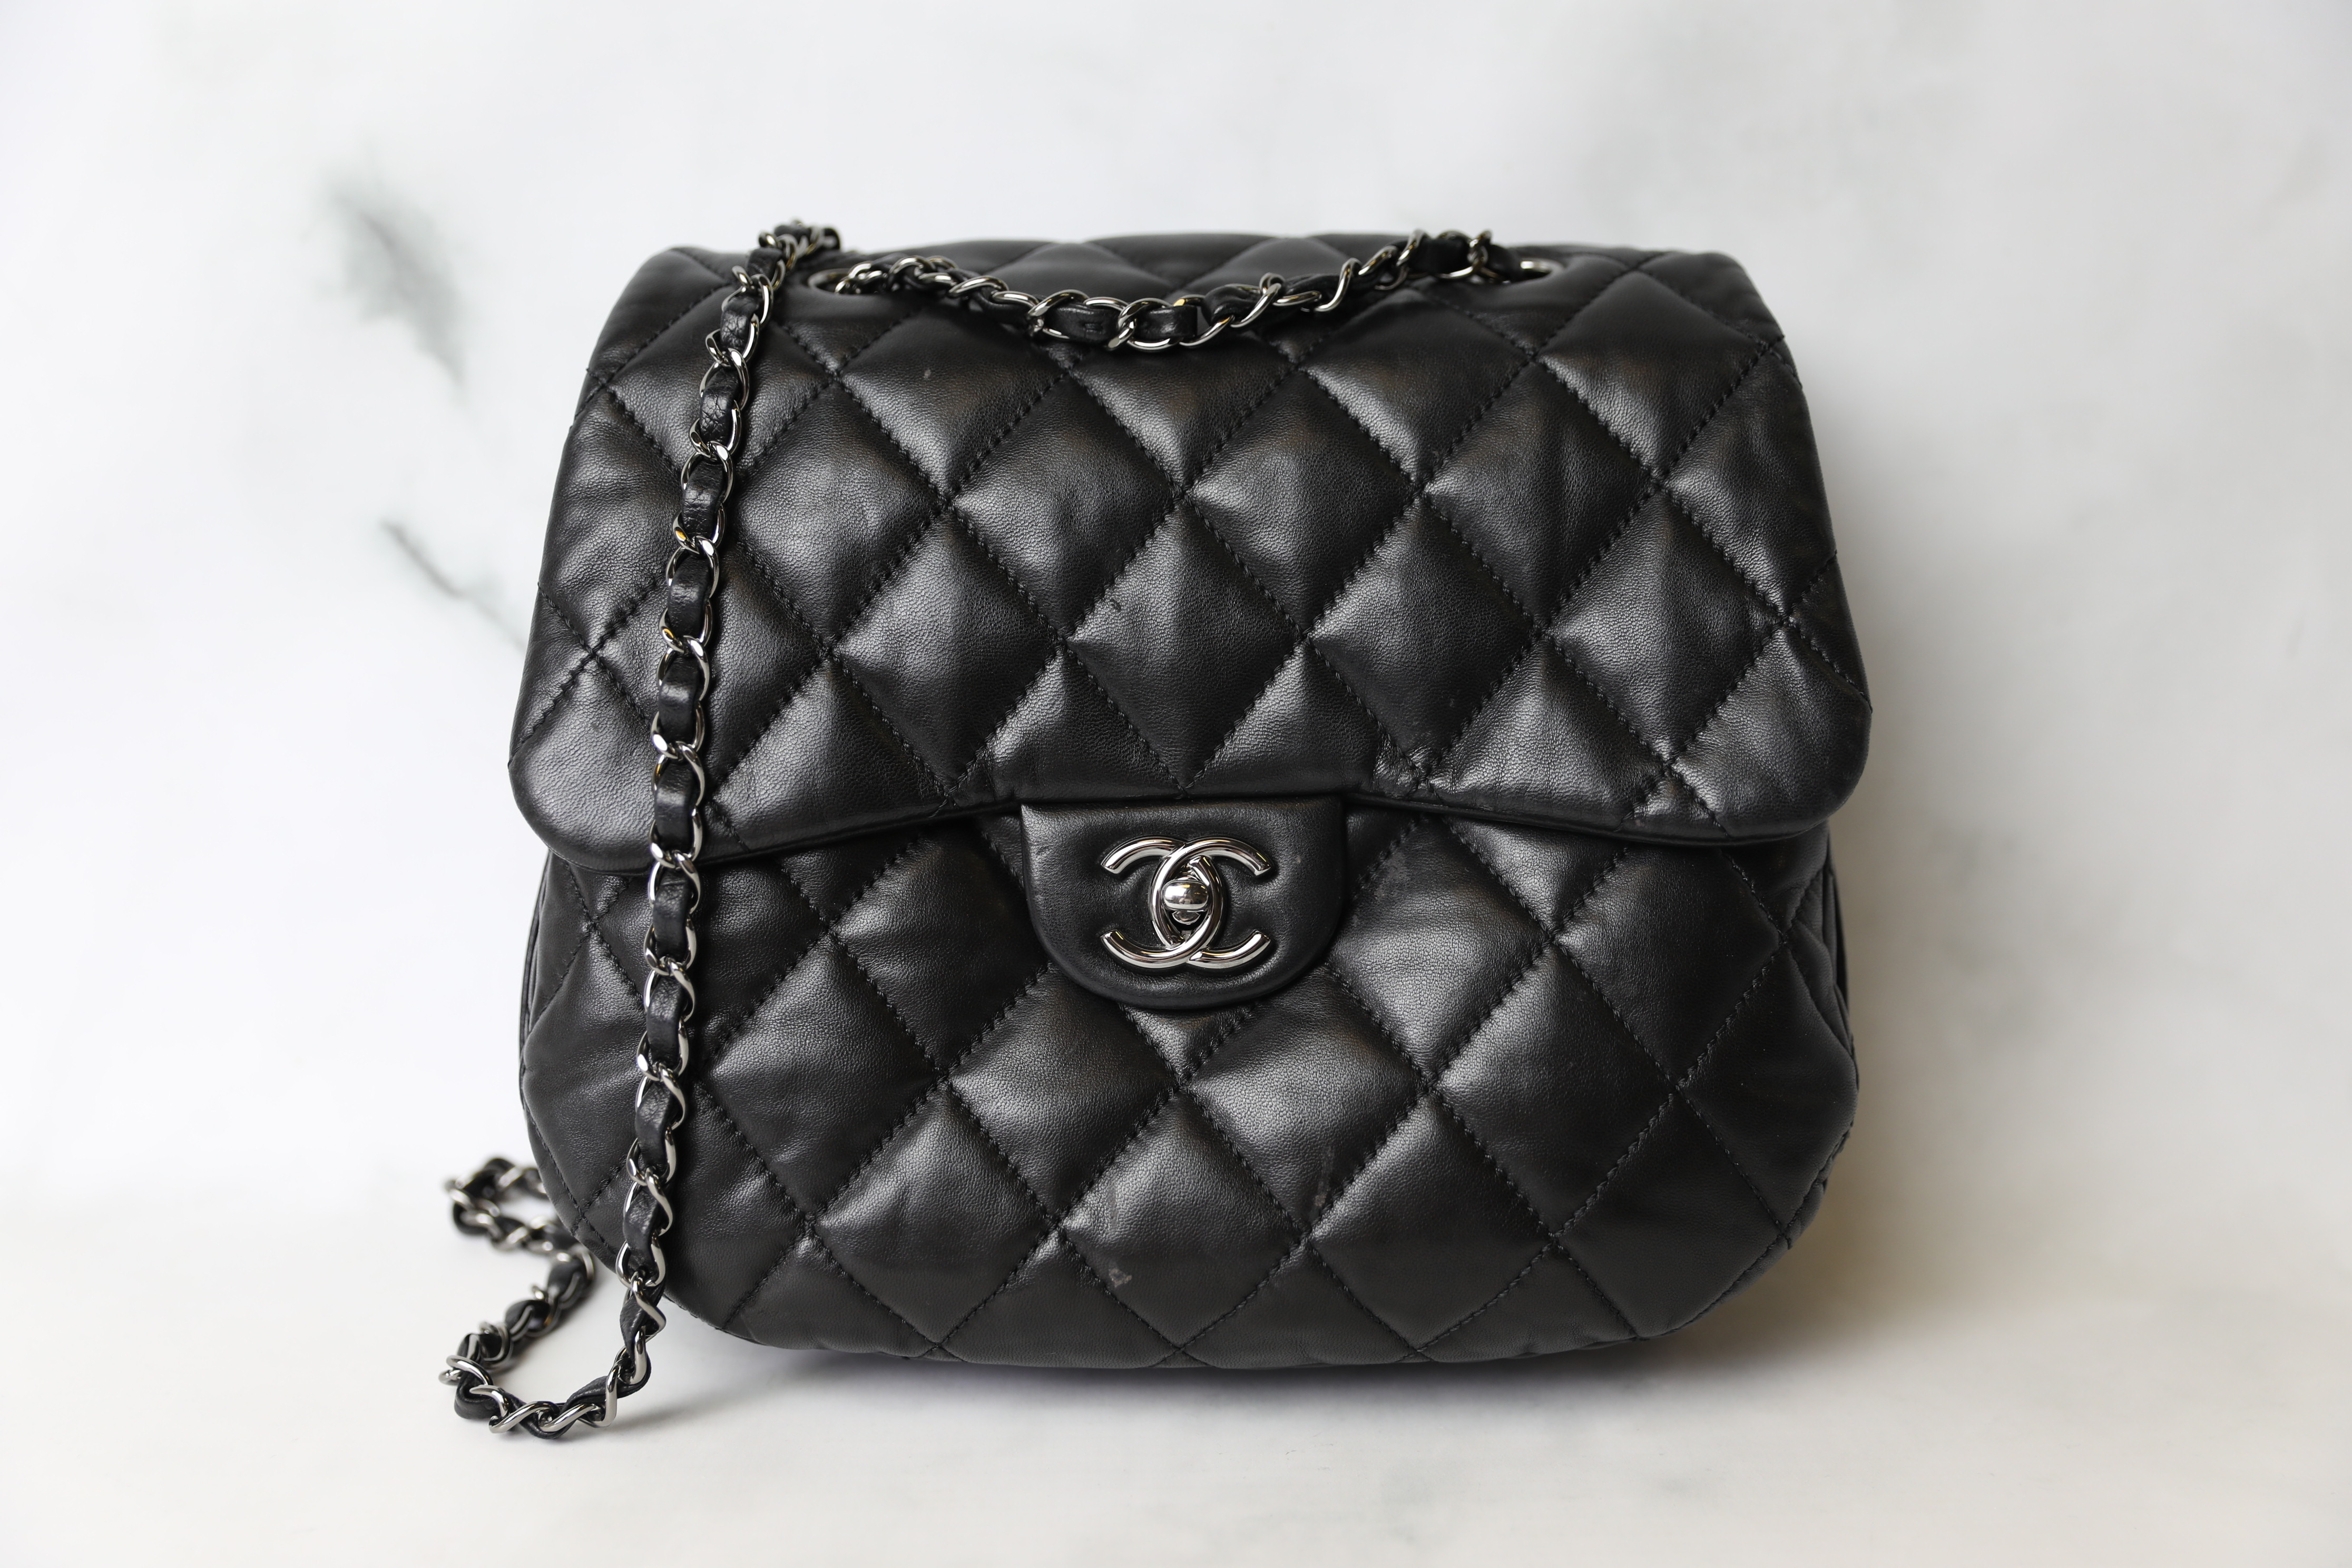 Chanel Quilted Saddle Bag, Black Calfskin with Silver Hardware